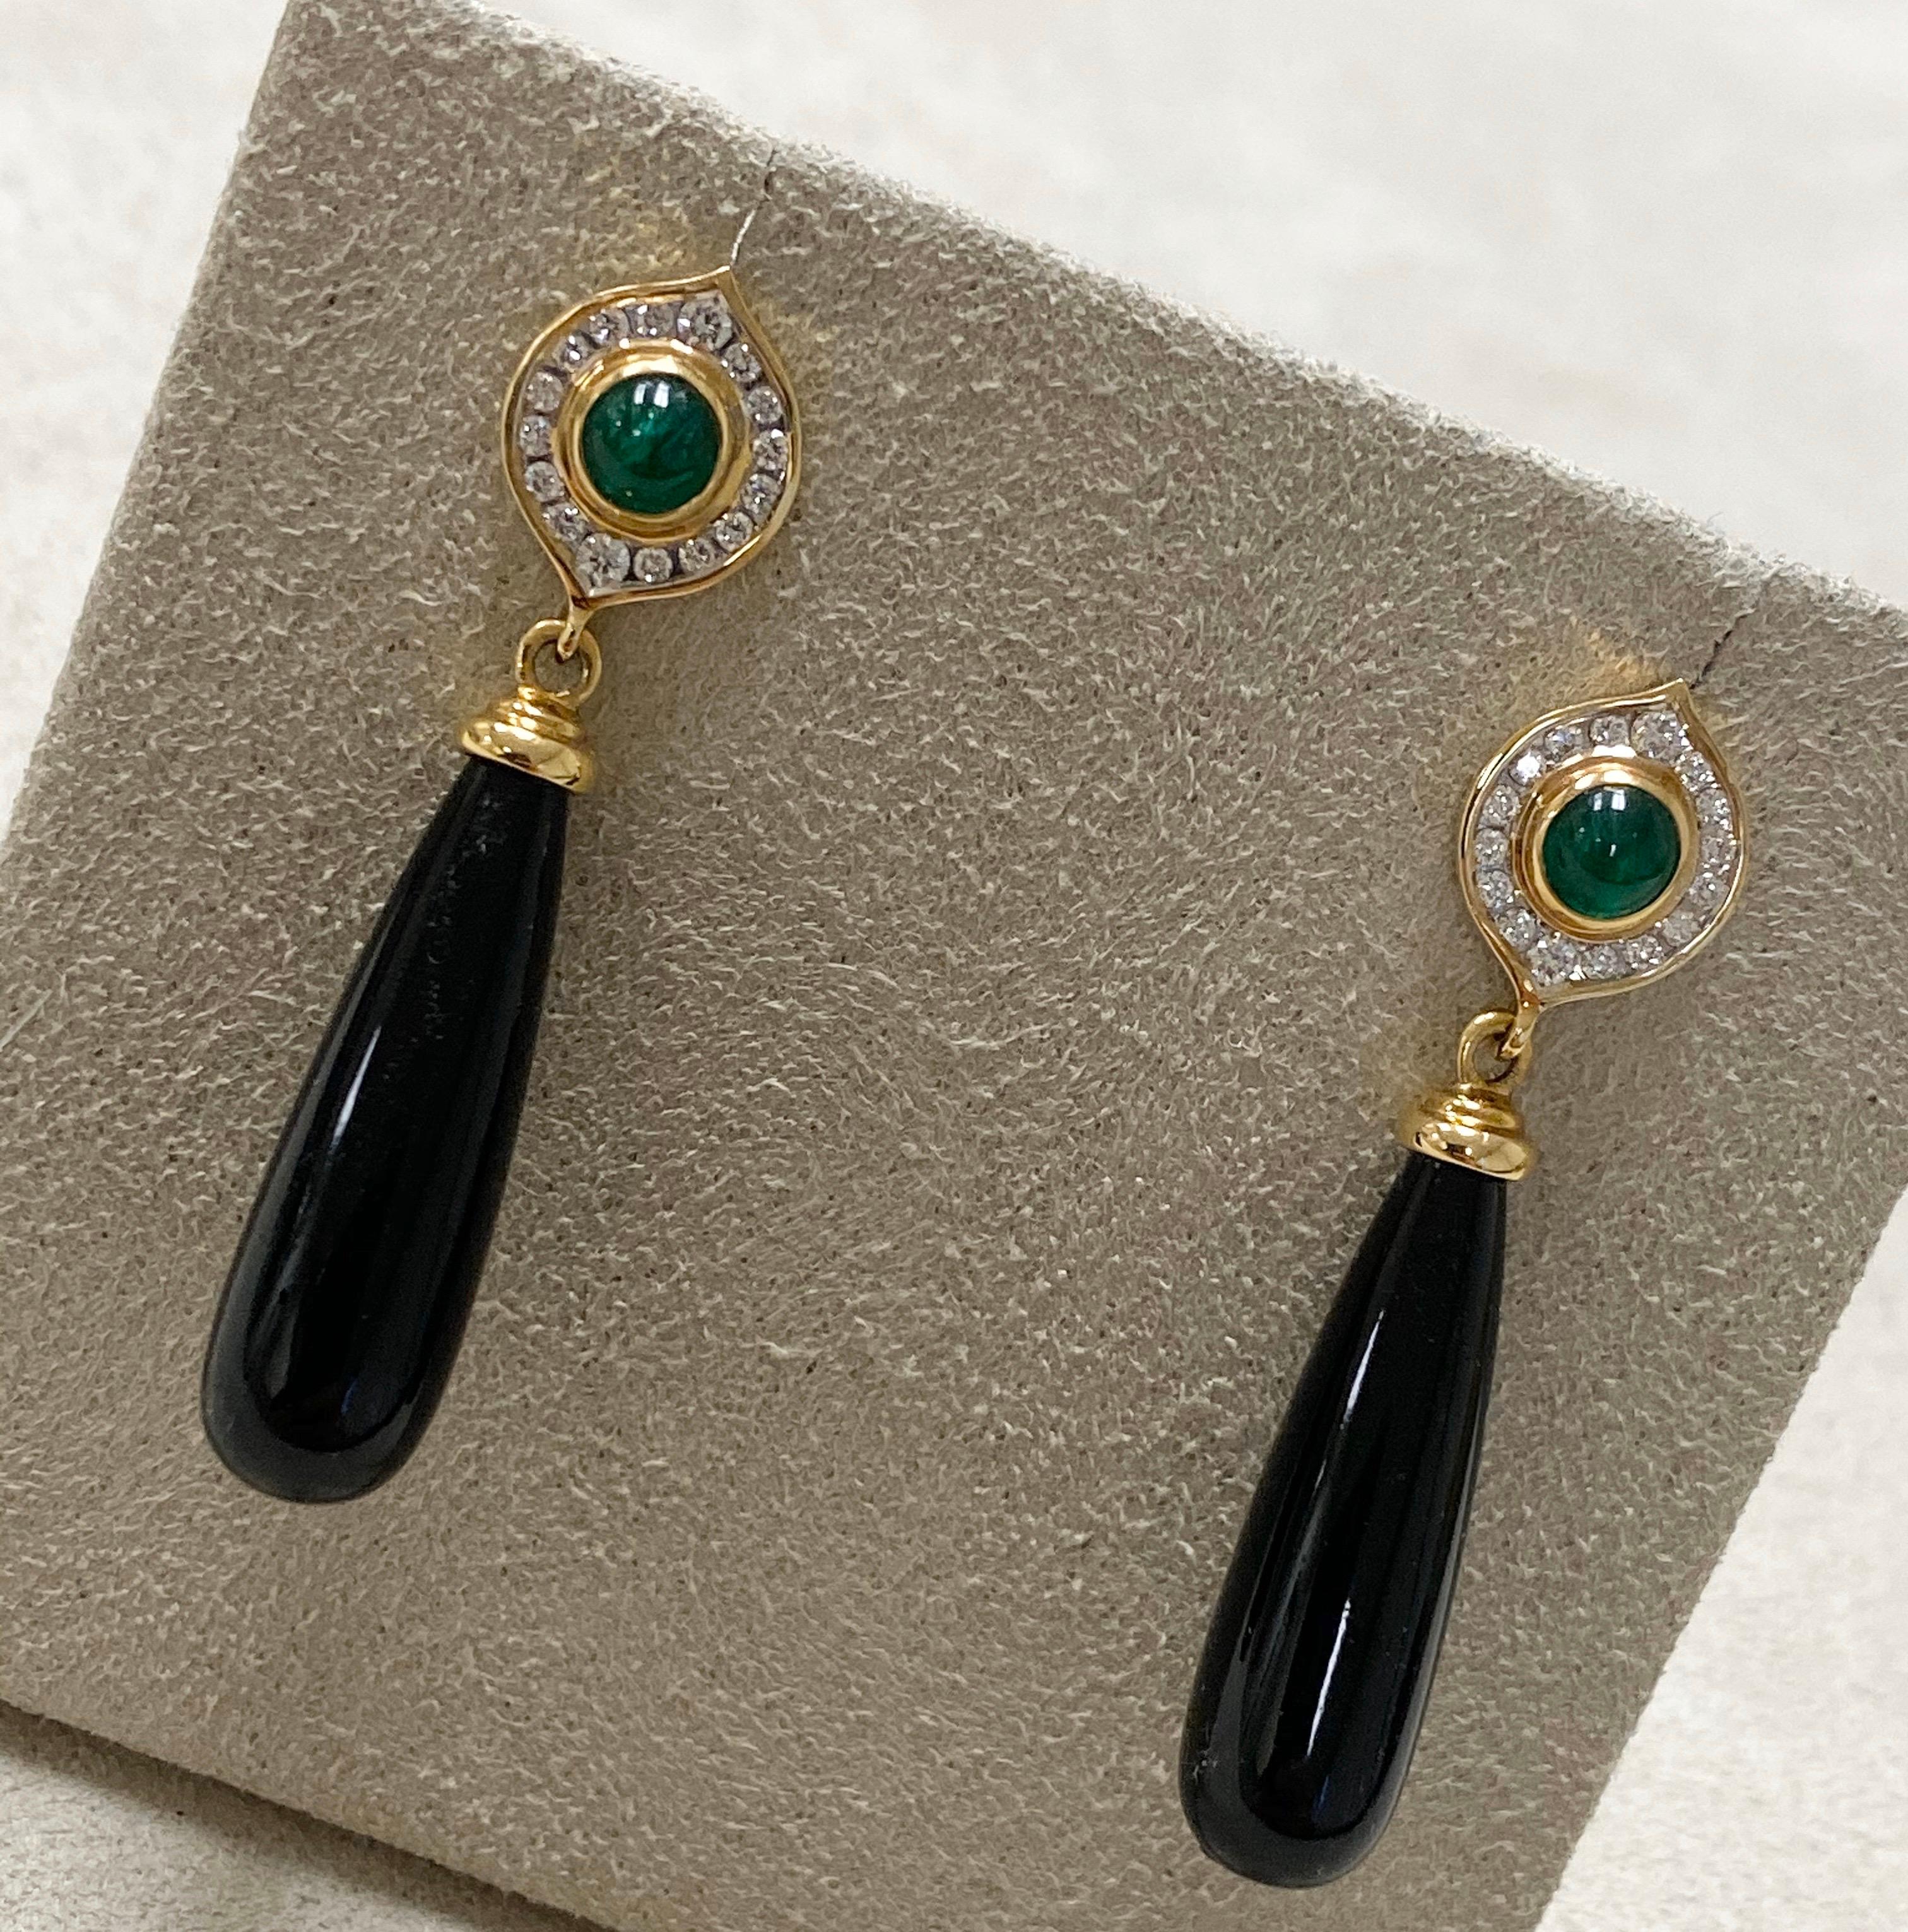 Created in 18 karat yellow gold
Black onyx 33 cts approx
Emeralds 0.70 ct approx
Diamonds 0.30 ct approx
Limited edition

Adorn yourself with these exquisitely crafted Candy Blue Topaz & Diamond earrings set in 18k yellow gold and featuring black